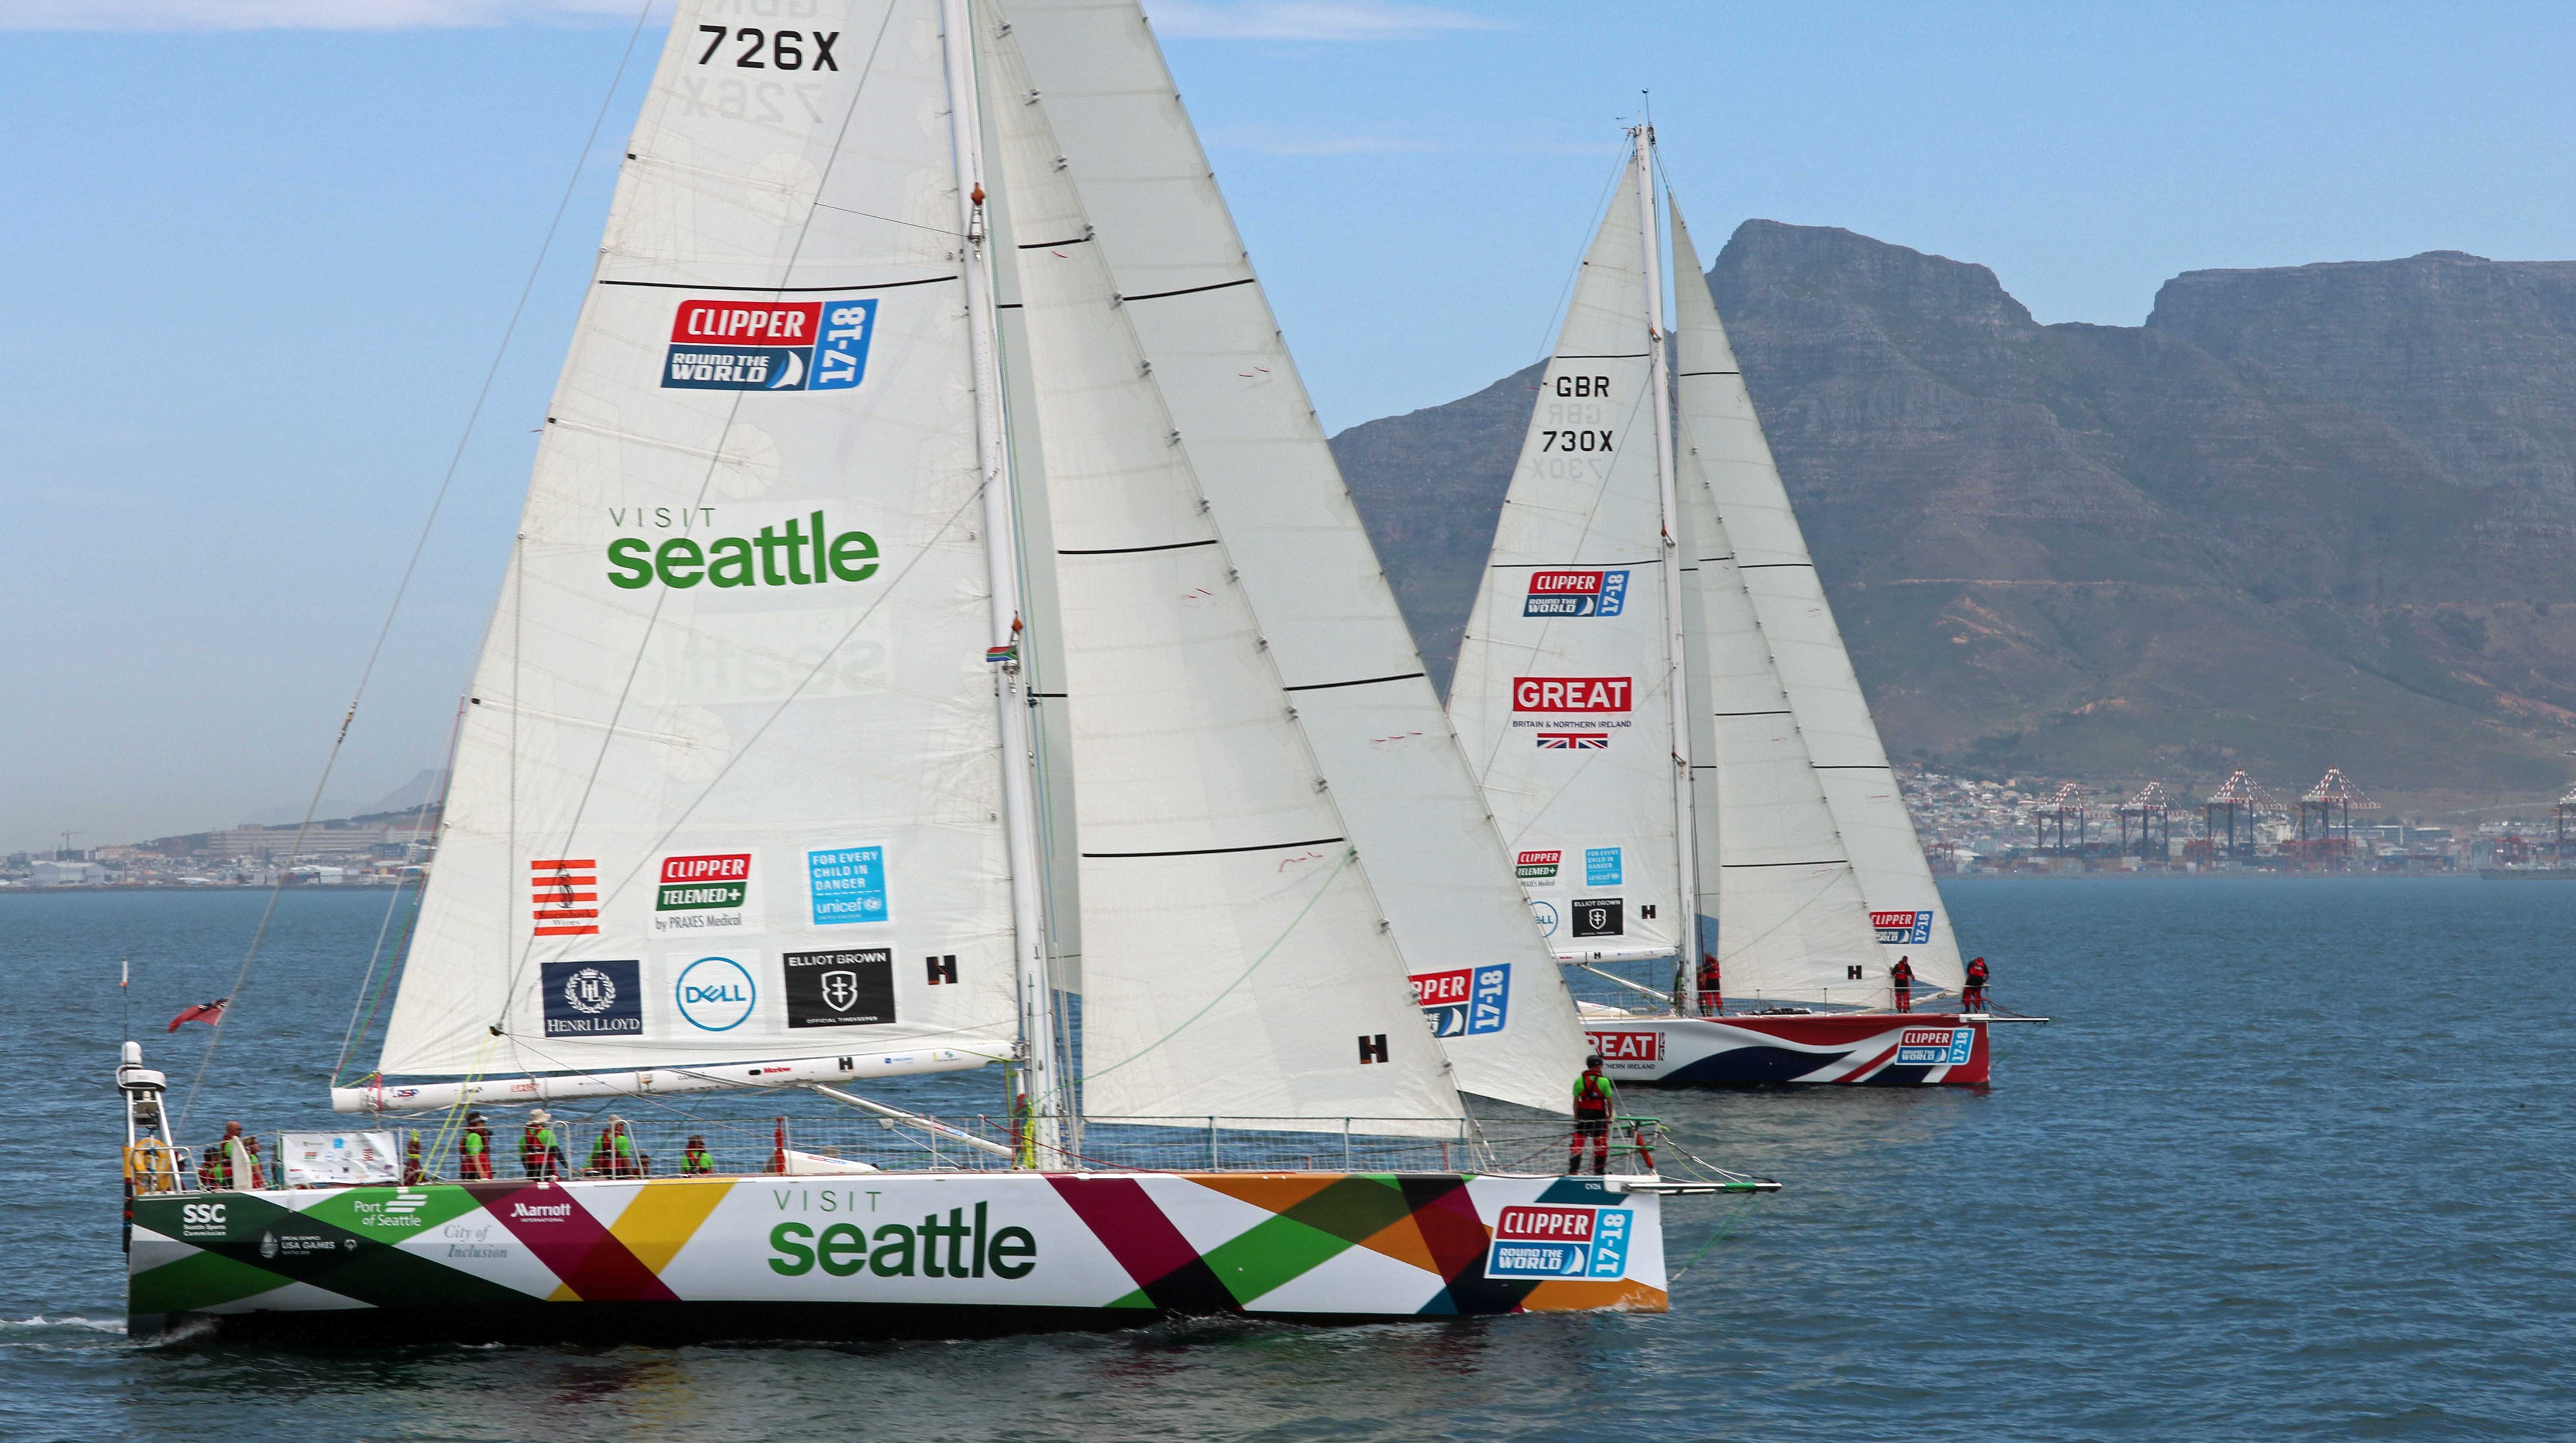 ​Cape Town to Host Global Sailing Race as Seattle Revealed as Team Entry